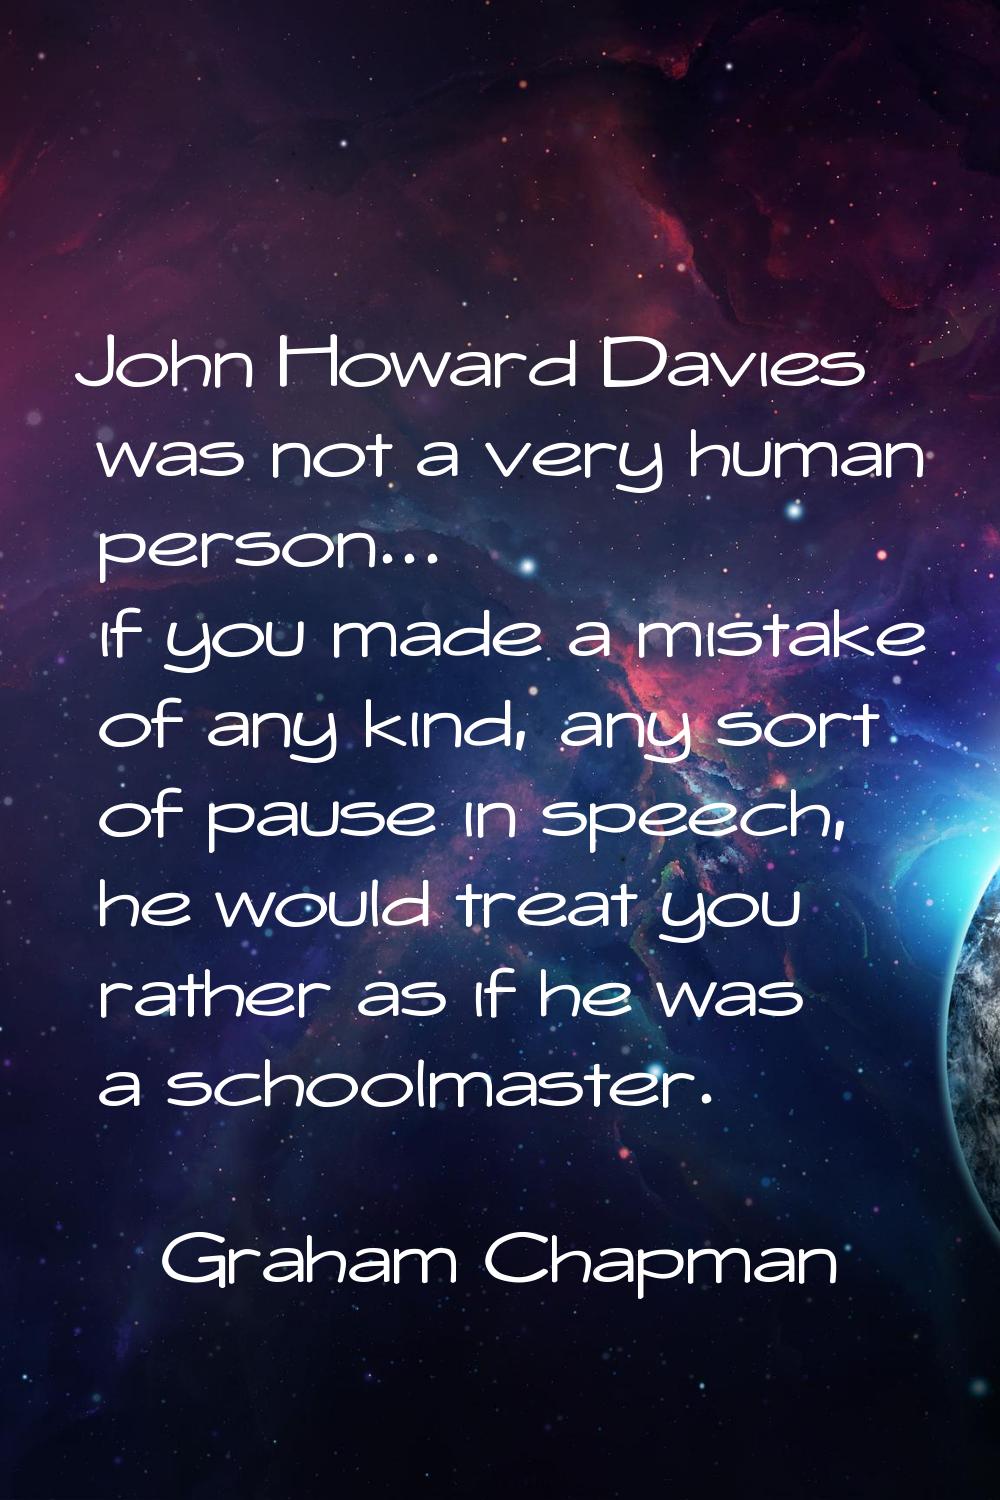 John Howard Davies was not a very human person... if you made a mistake of any kind, any sort of pa